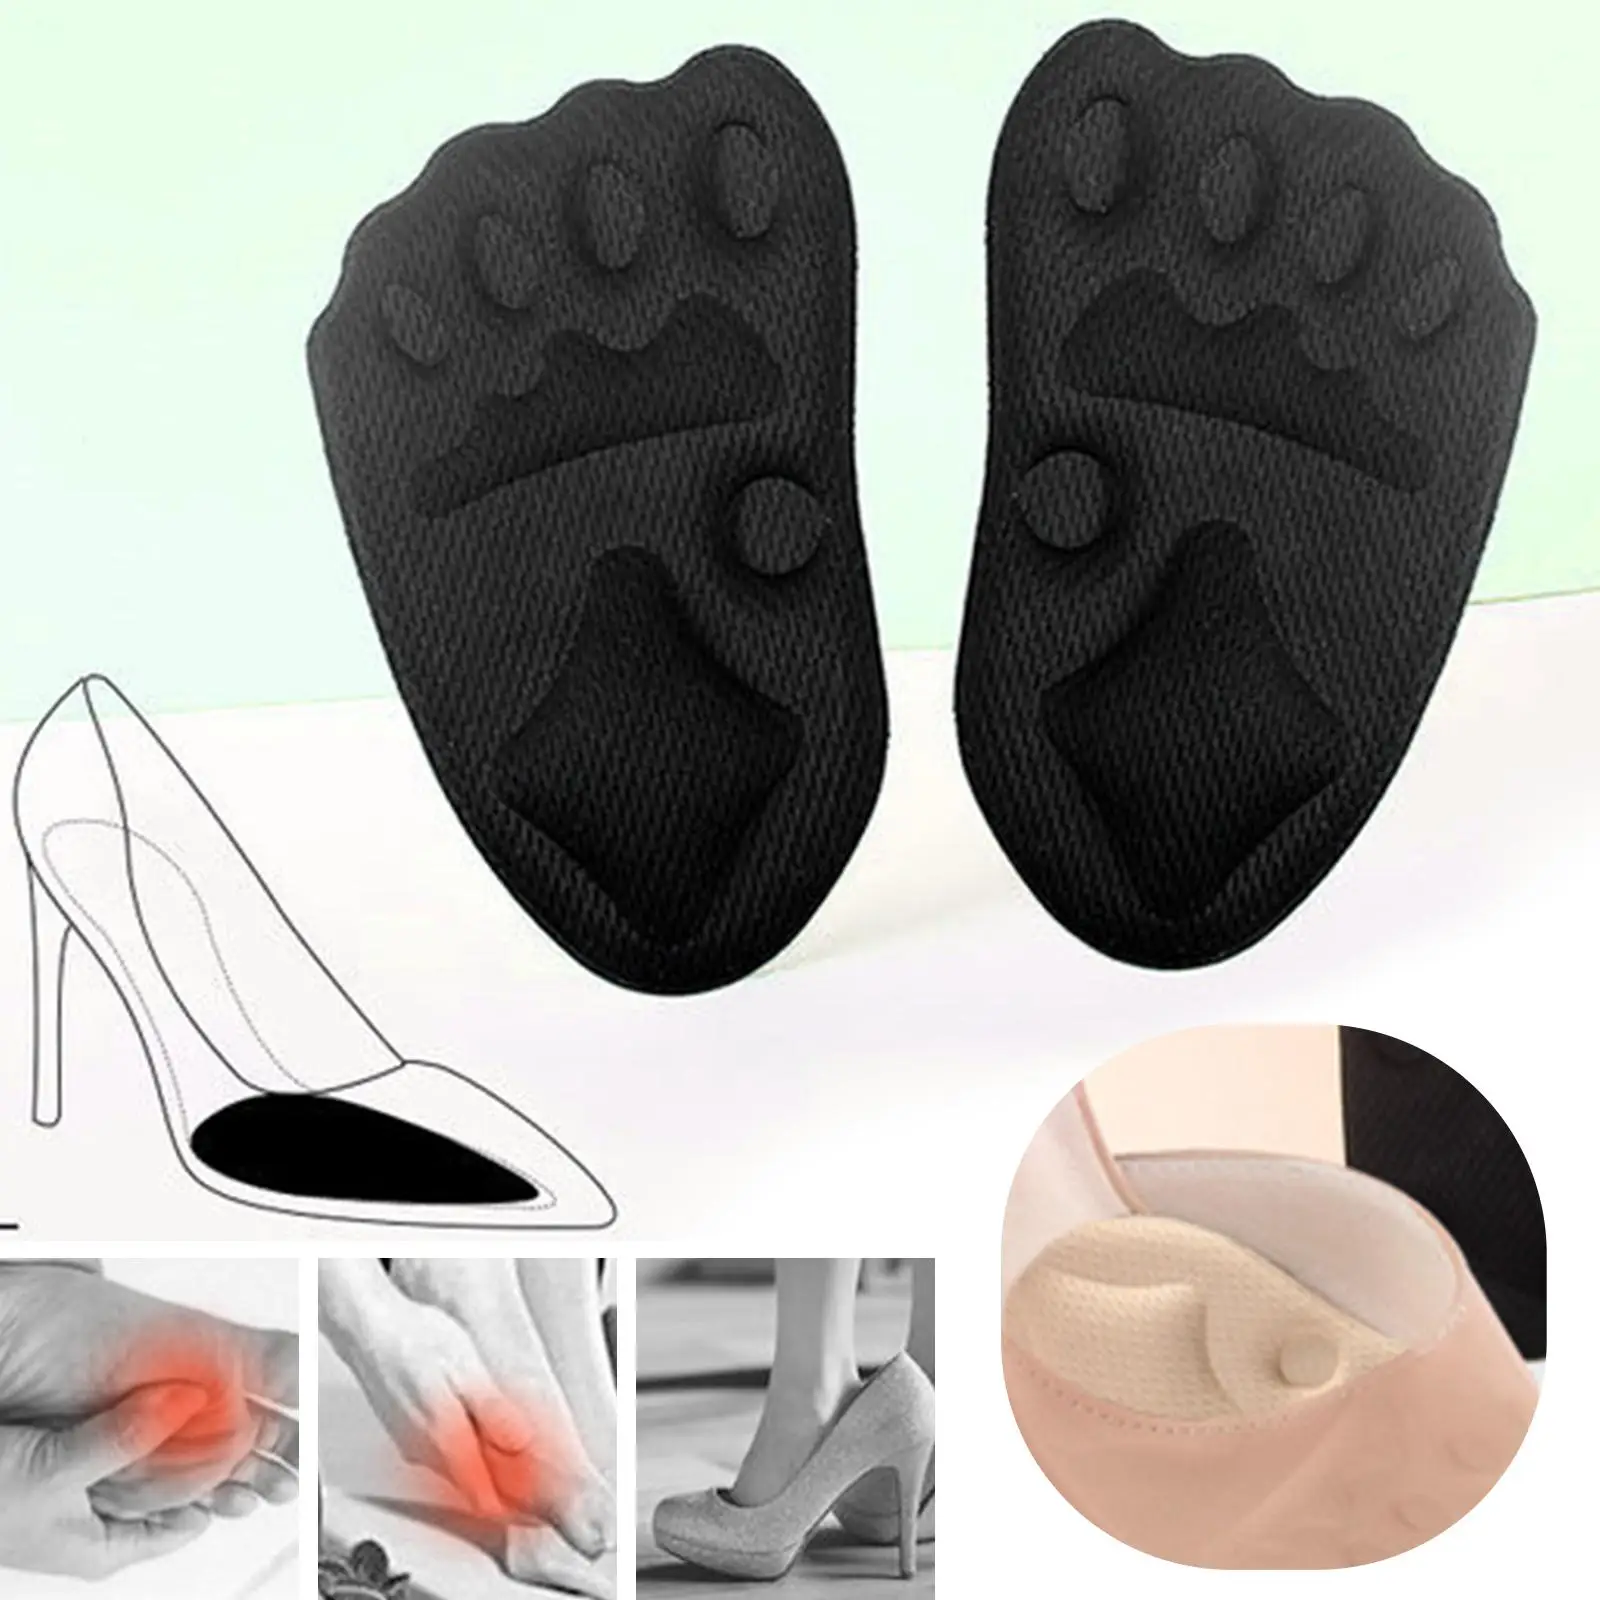 5Pair High Heel Cushion Inserts Metatarsal Pads Foot Protector for Women